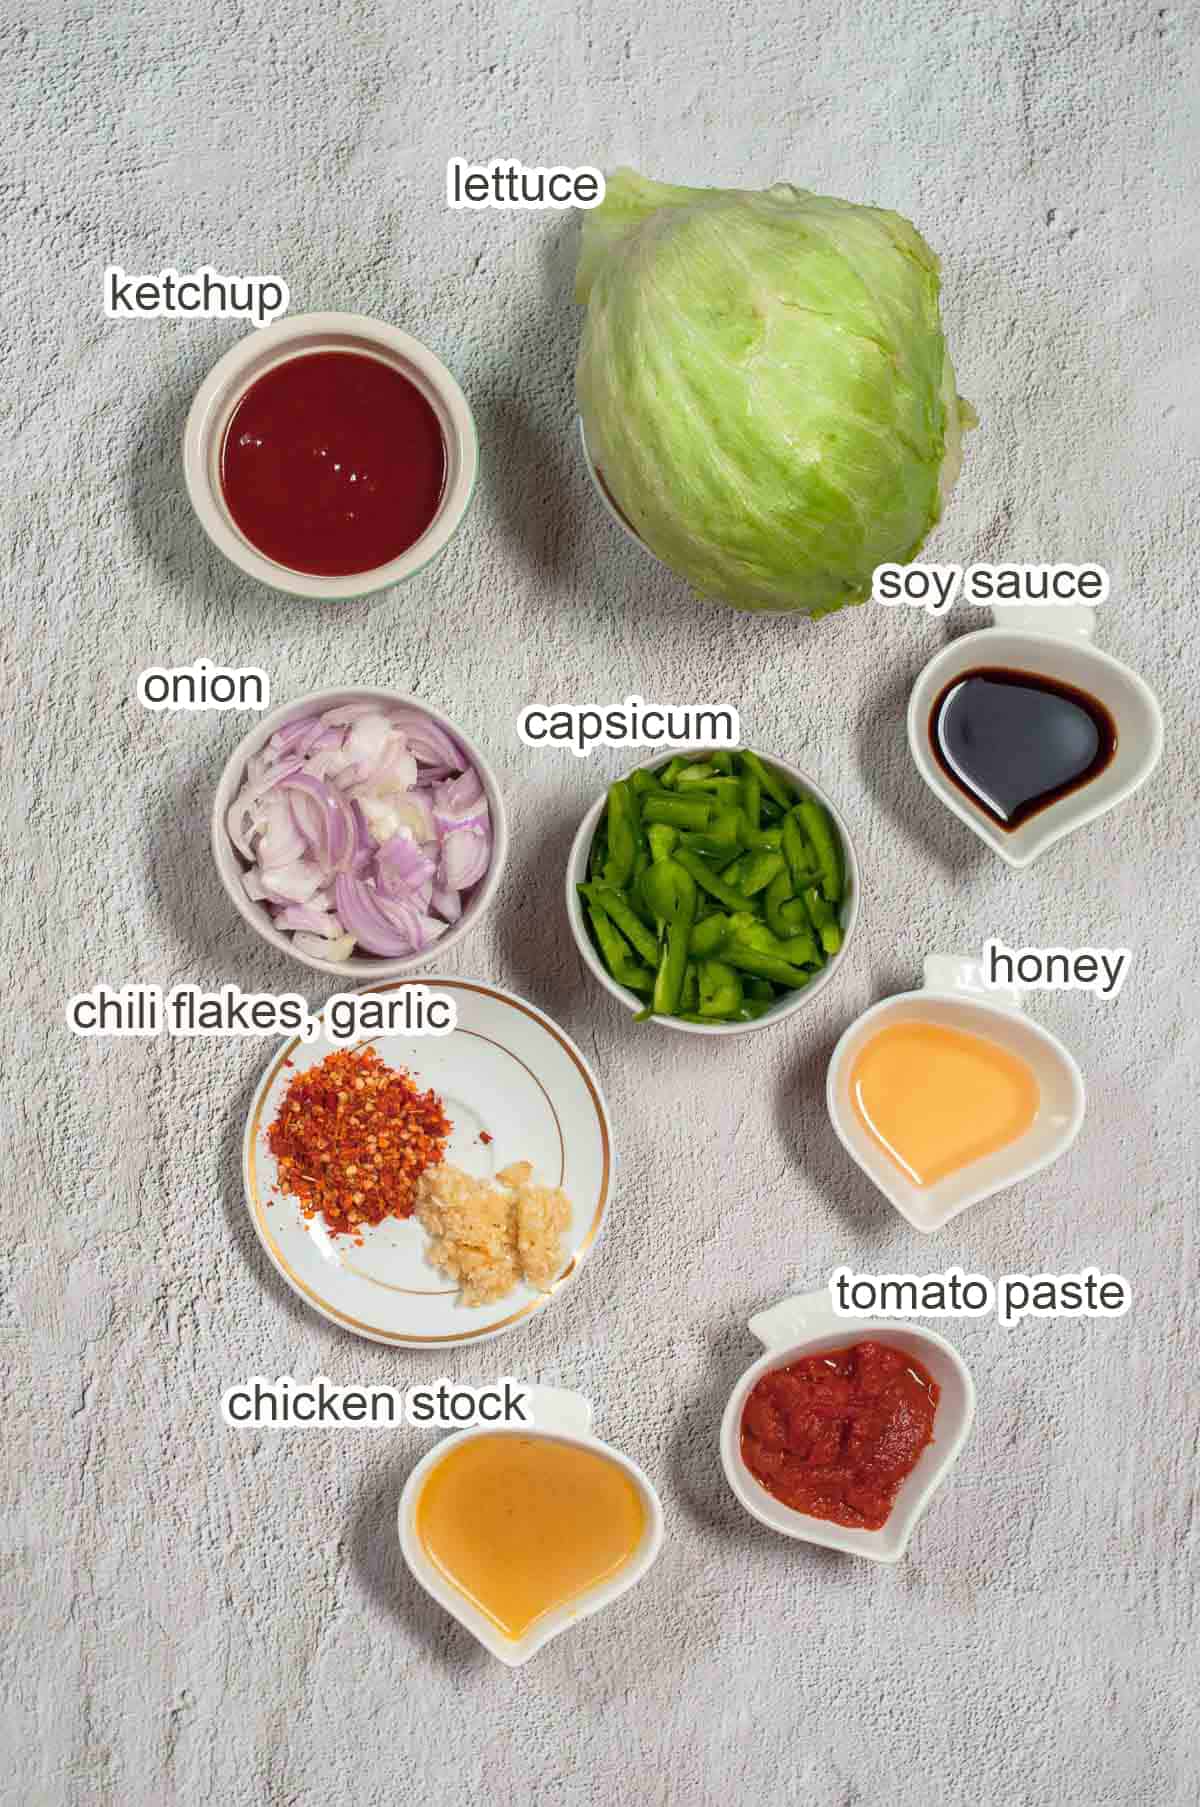 Ingredients of sauce and lettuce wrap.